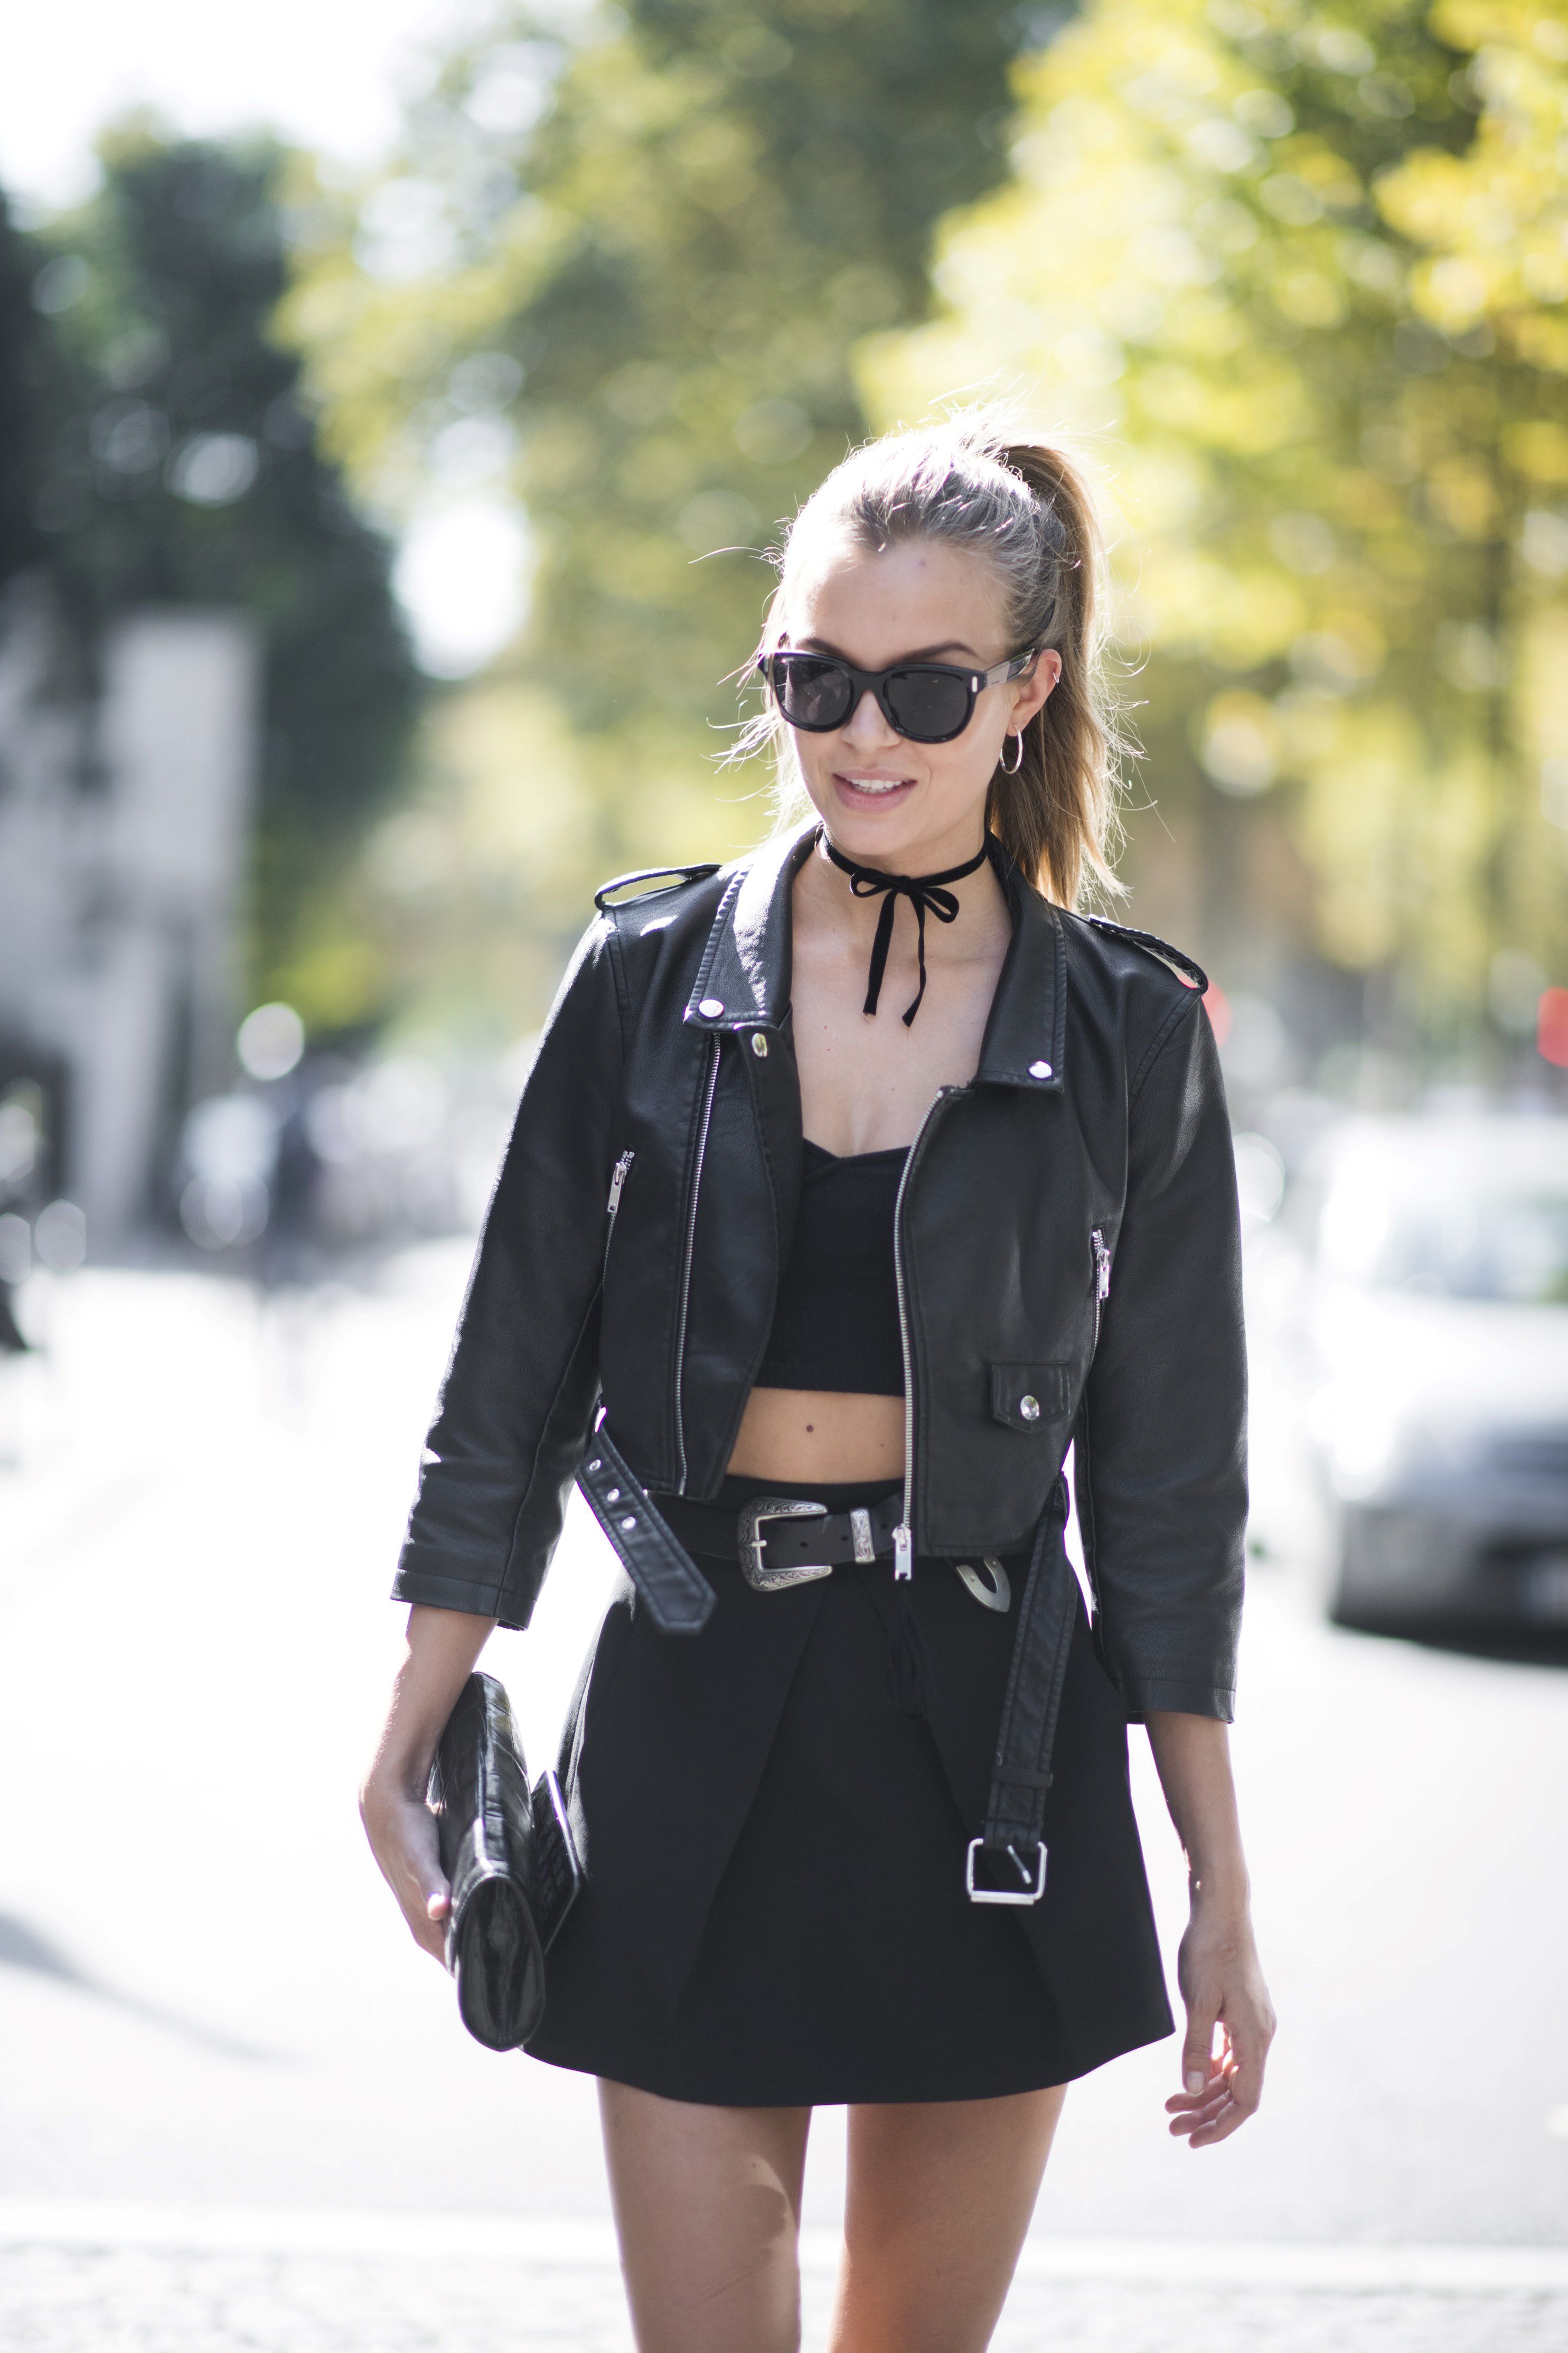 Josephine Skriver out & about in Paris